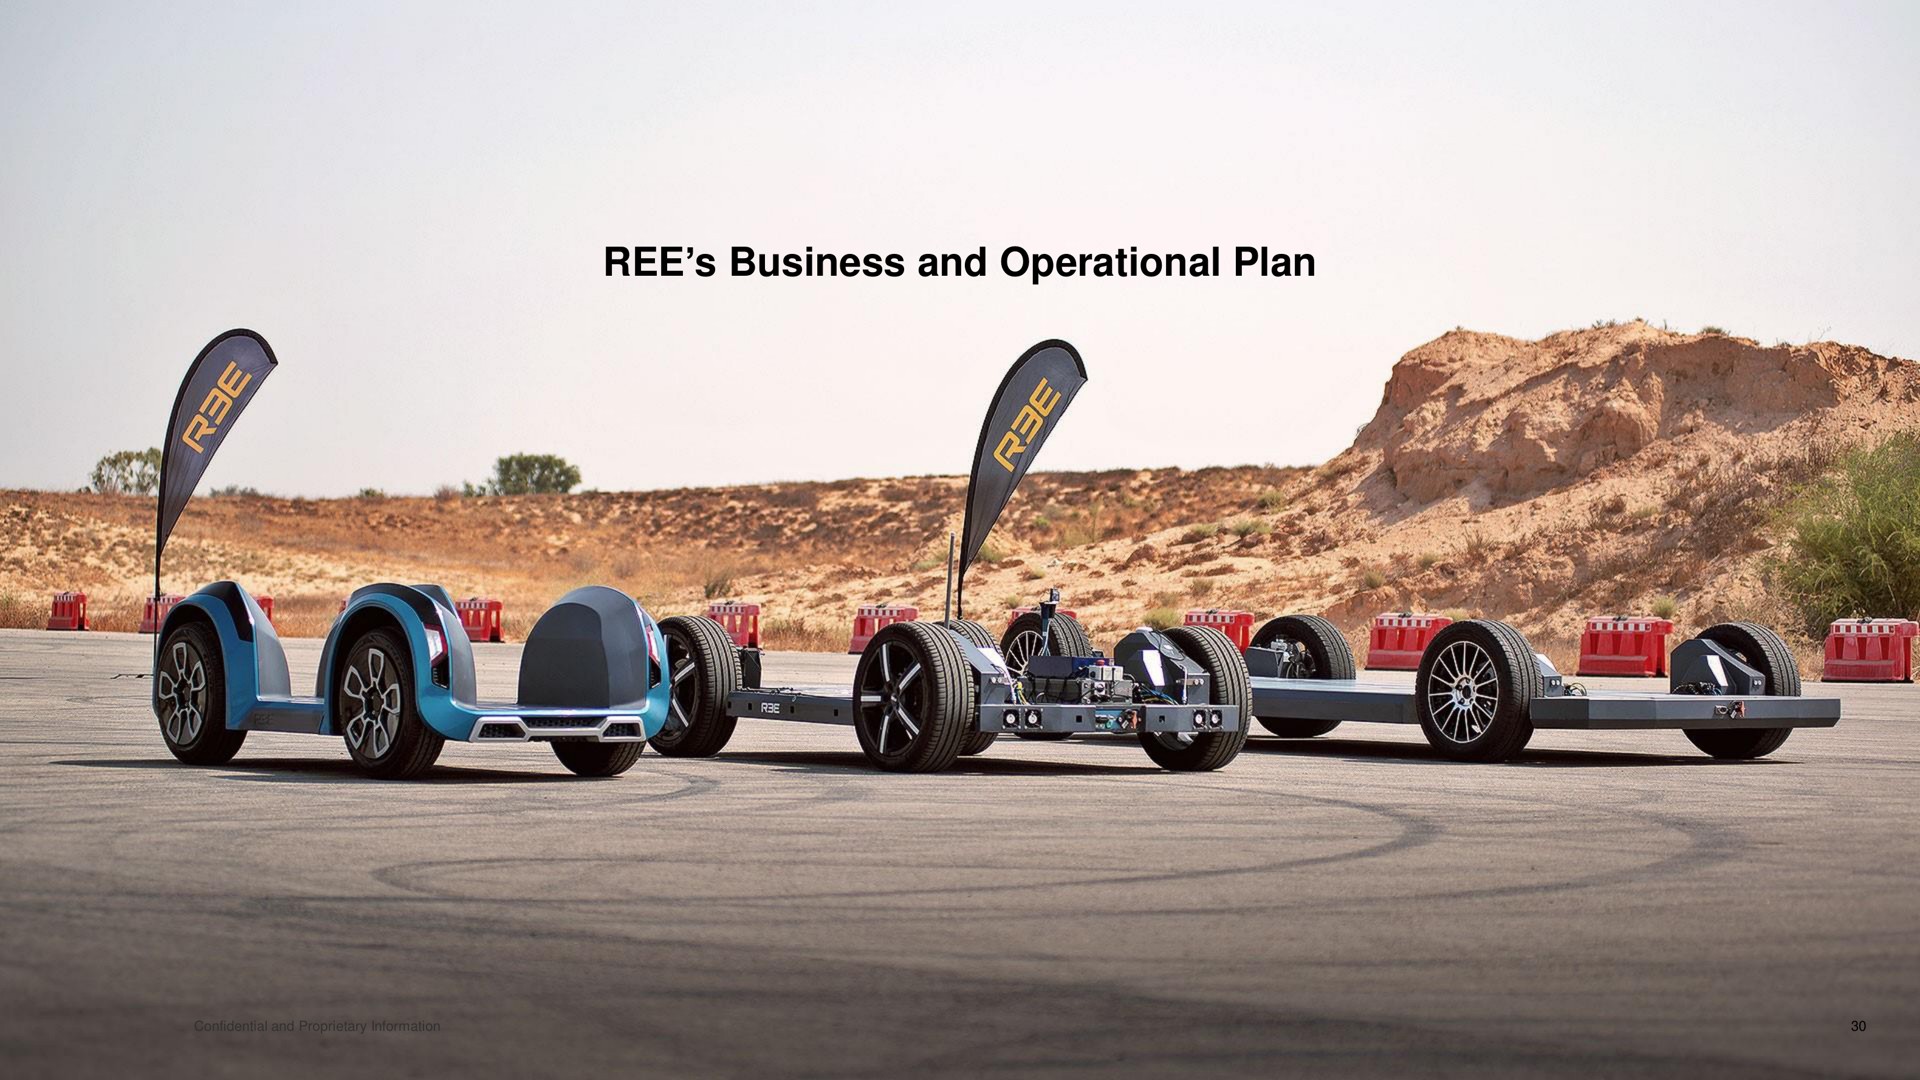 ree business and operational plan | REE